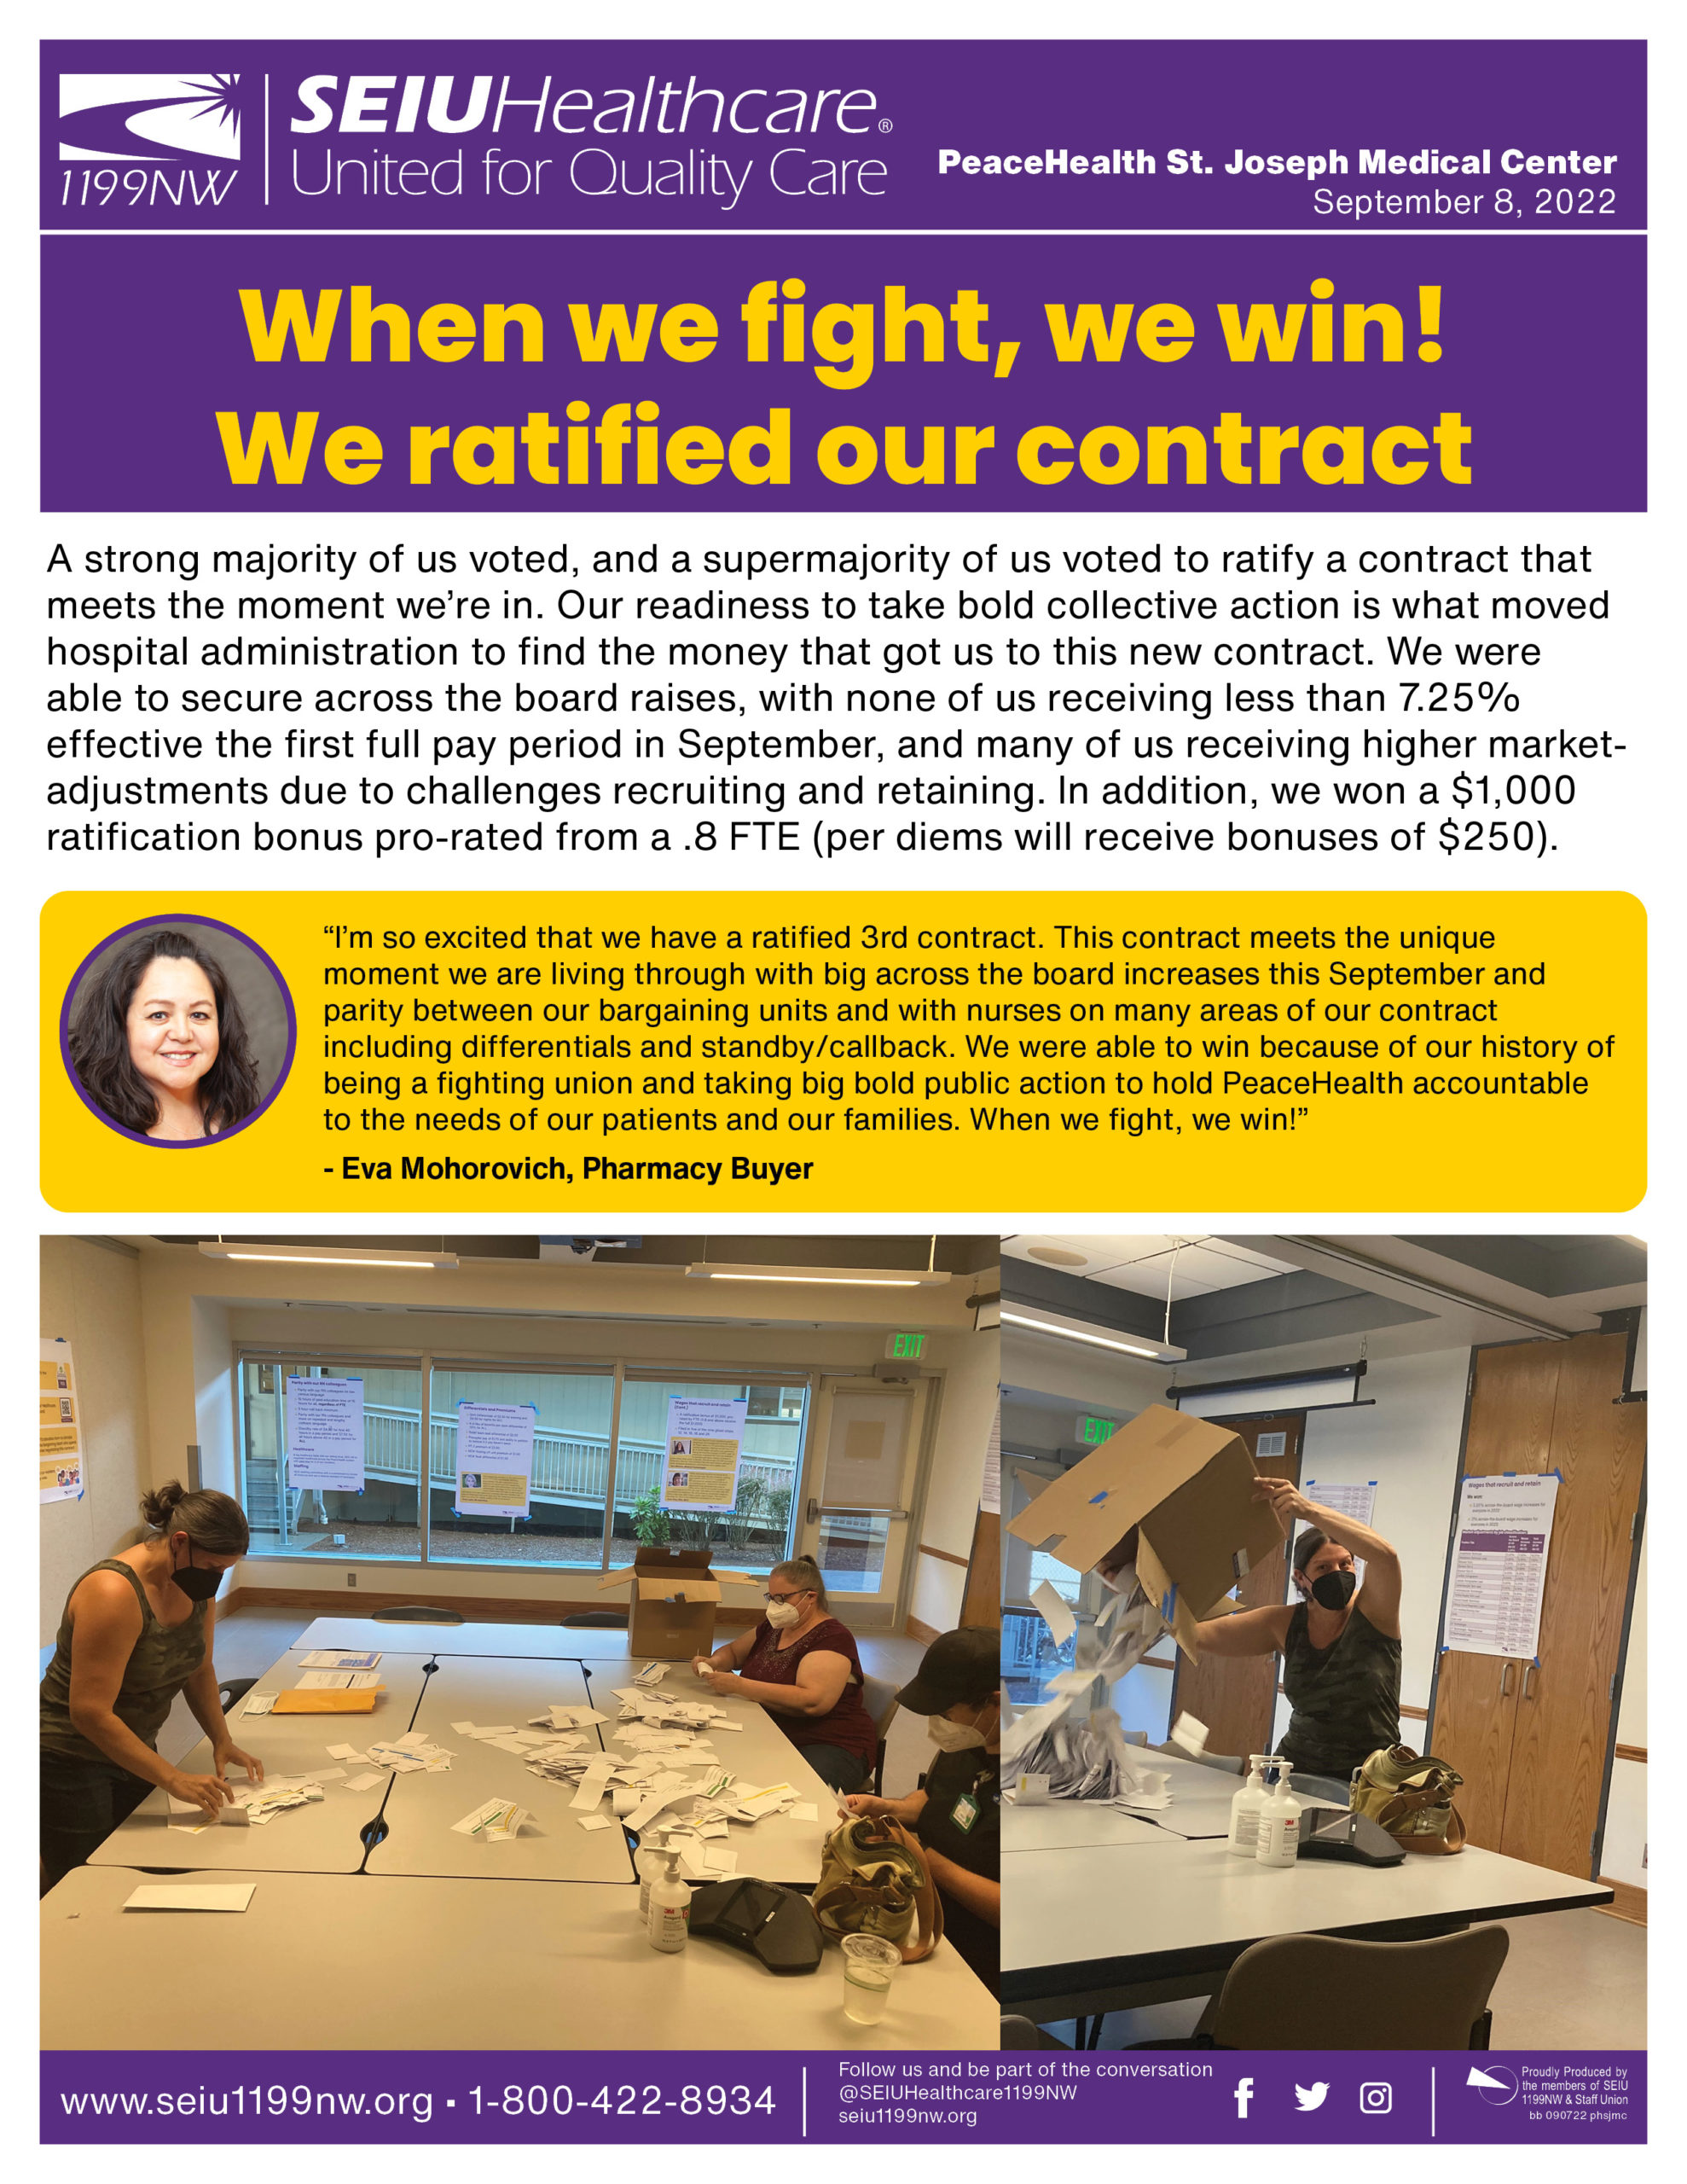 When we fight, we win! We ratified our contract